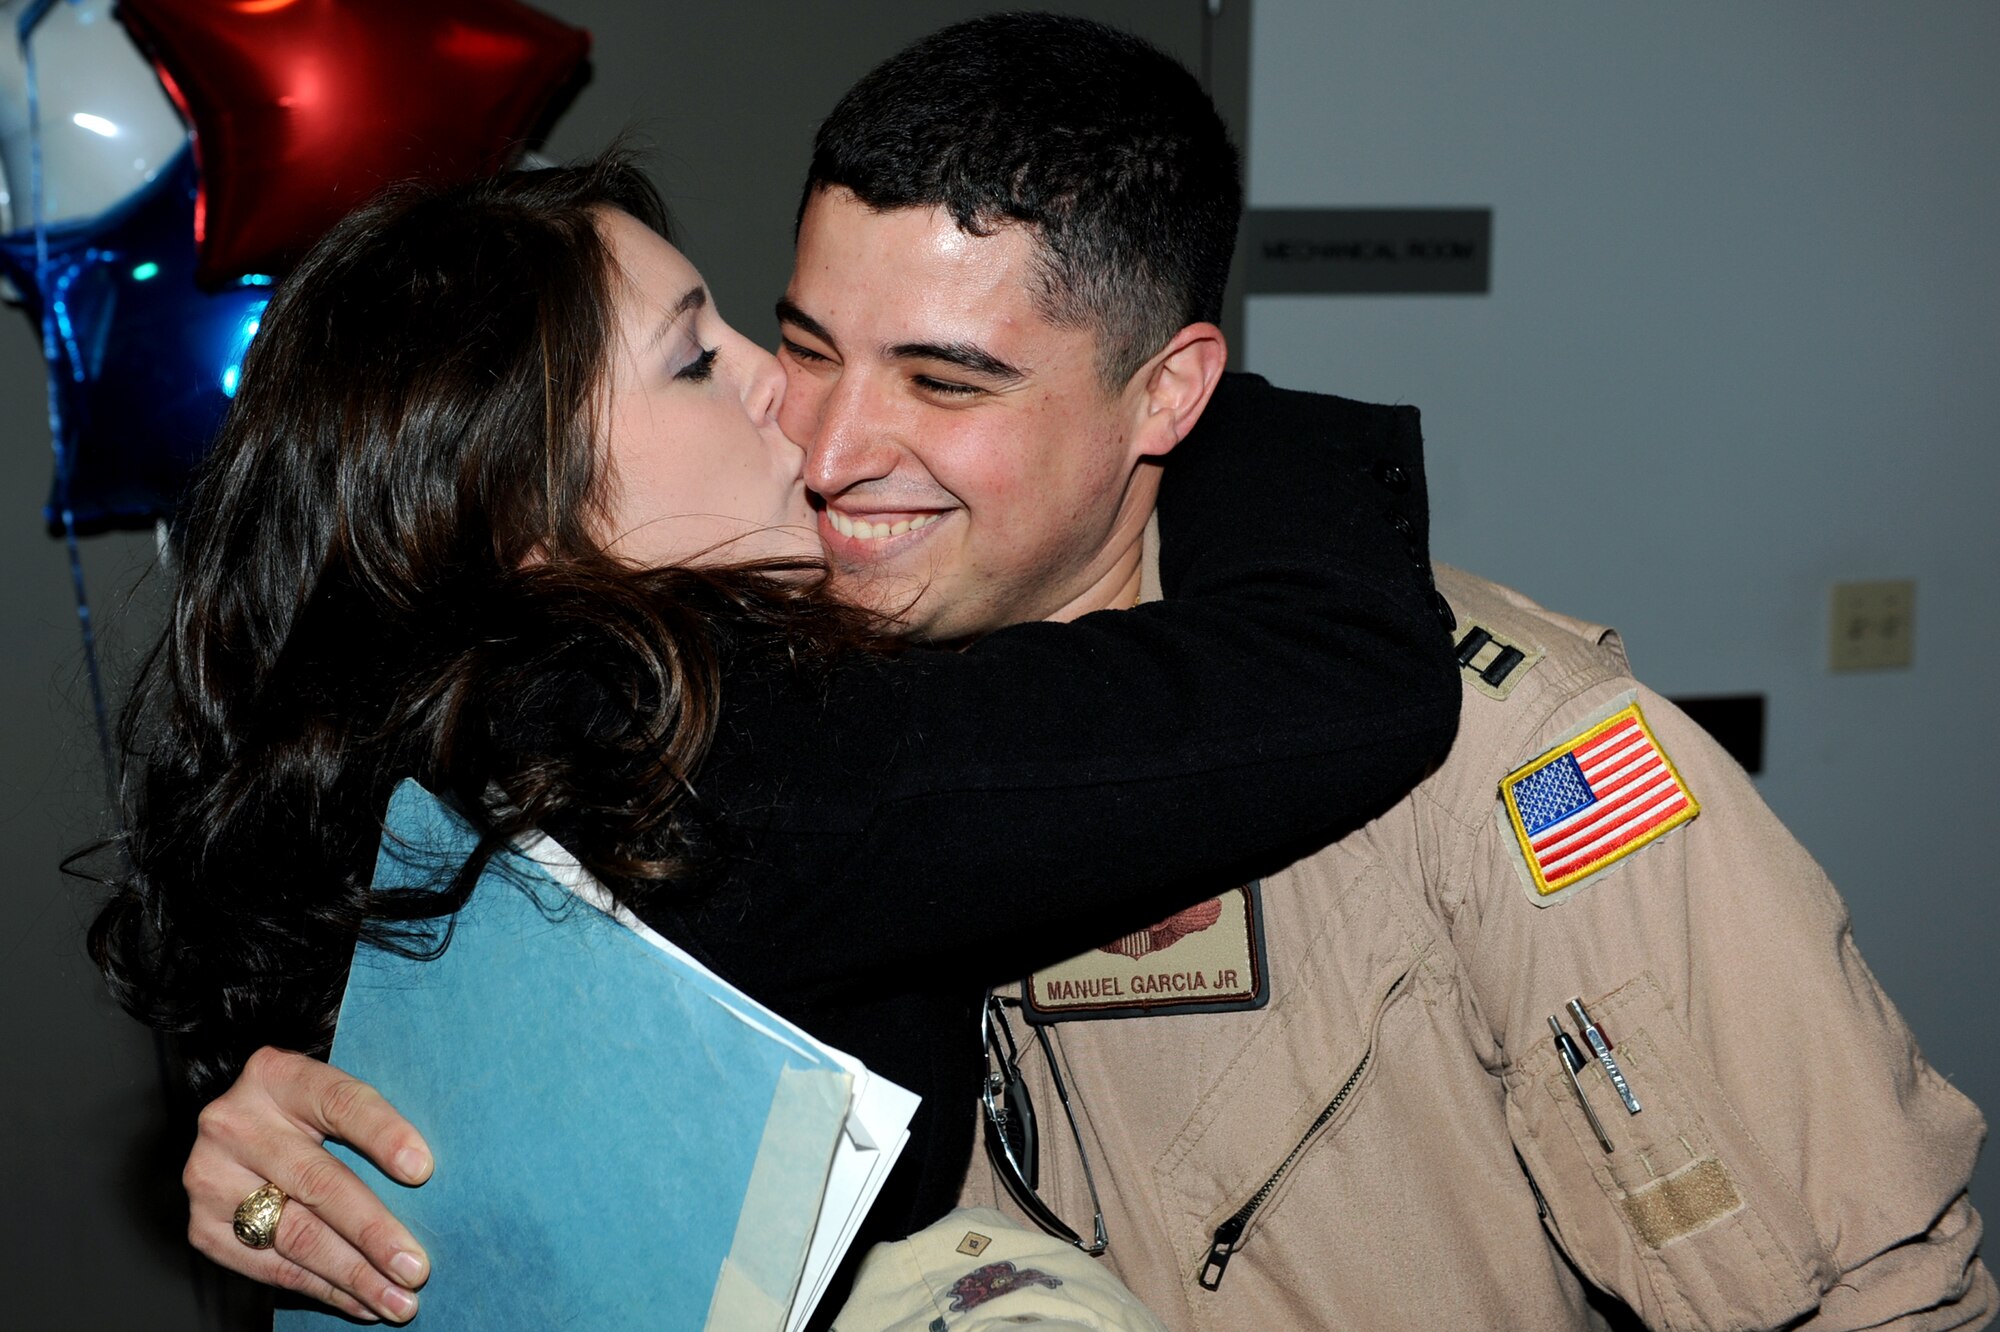 Capt. Manuel Garcia Jr, a 53rd Airlift Squadron pilot, is greeted Christmas Day by his friend, Leslie Mueller. The Airmen returned home Dec. 25 after a four-month deployment to Southwest Asia. Base members, friends and family turned out in force to welcome the Airmen home. (U.S. Air Force photo by Senior Airman Ethan Morgan)